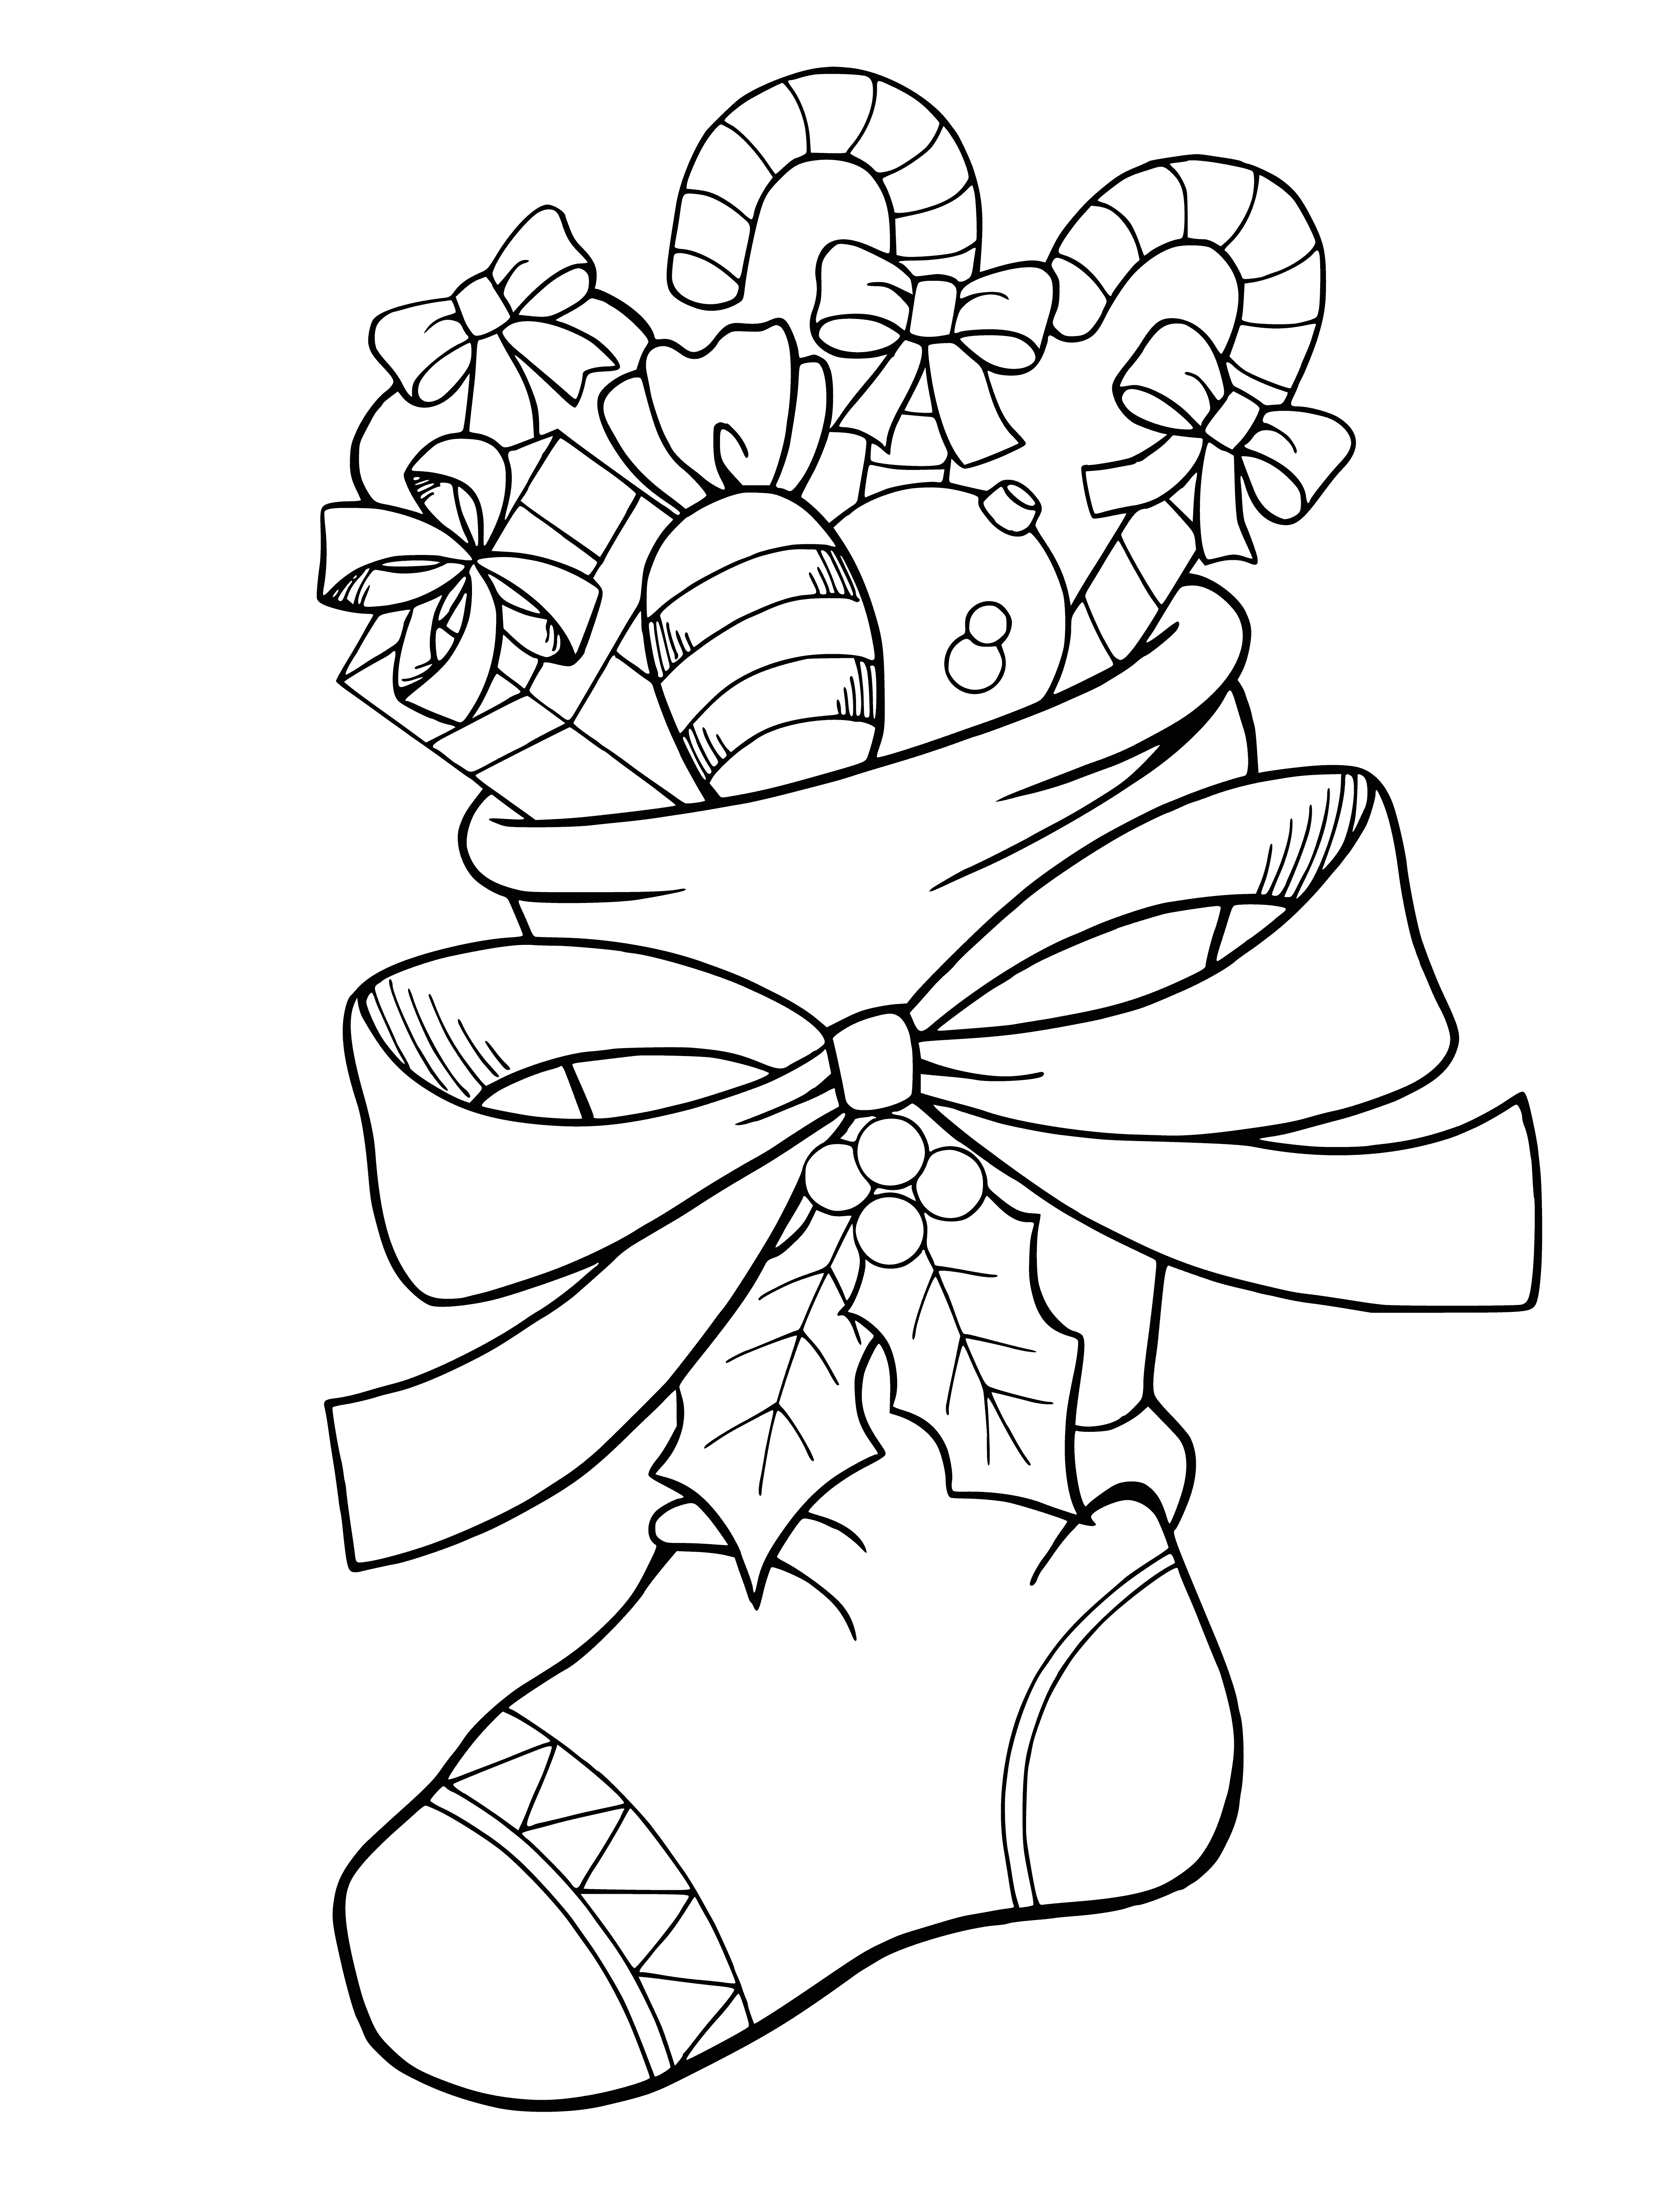 coloring page: Festive Xmas socks! Red & green w/ white cuffs & snowflakes all over.